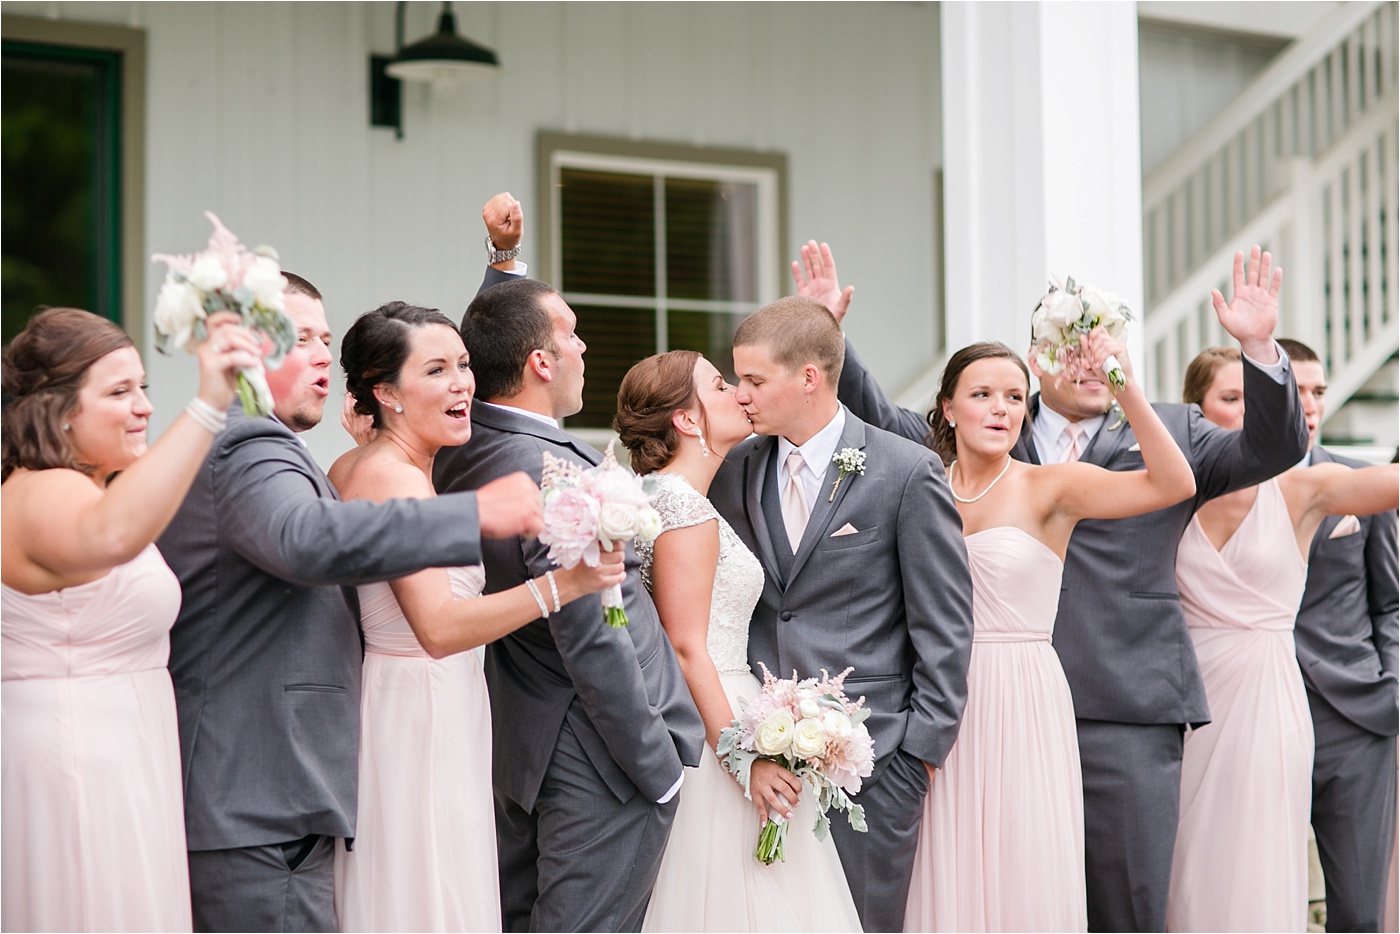 A Blush Outdoor wedding at Irongate Equestrian | KariMe Photography_0103